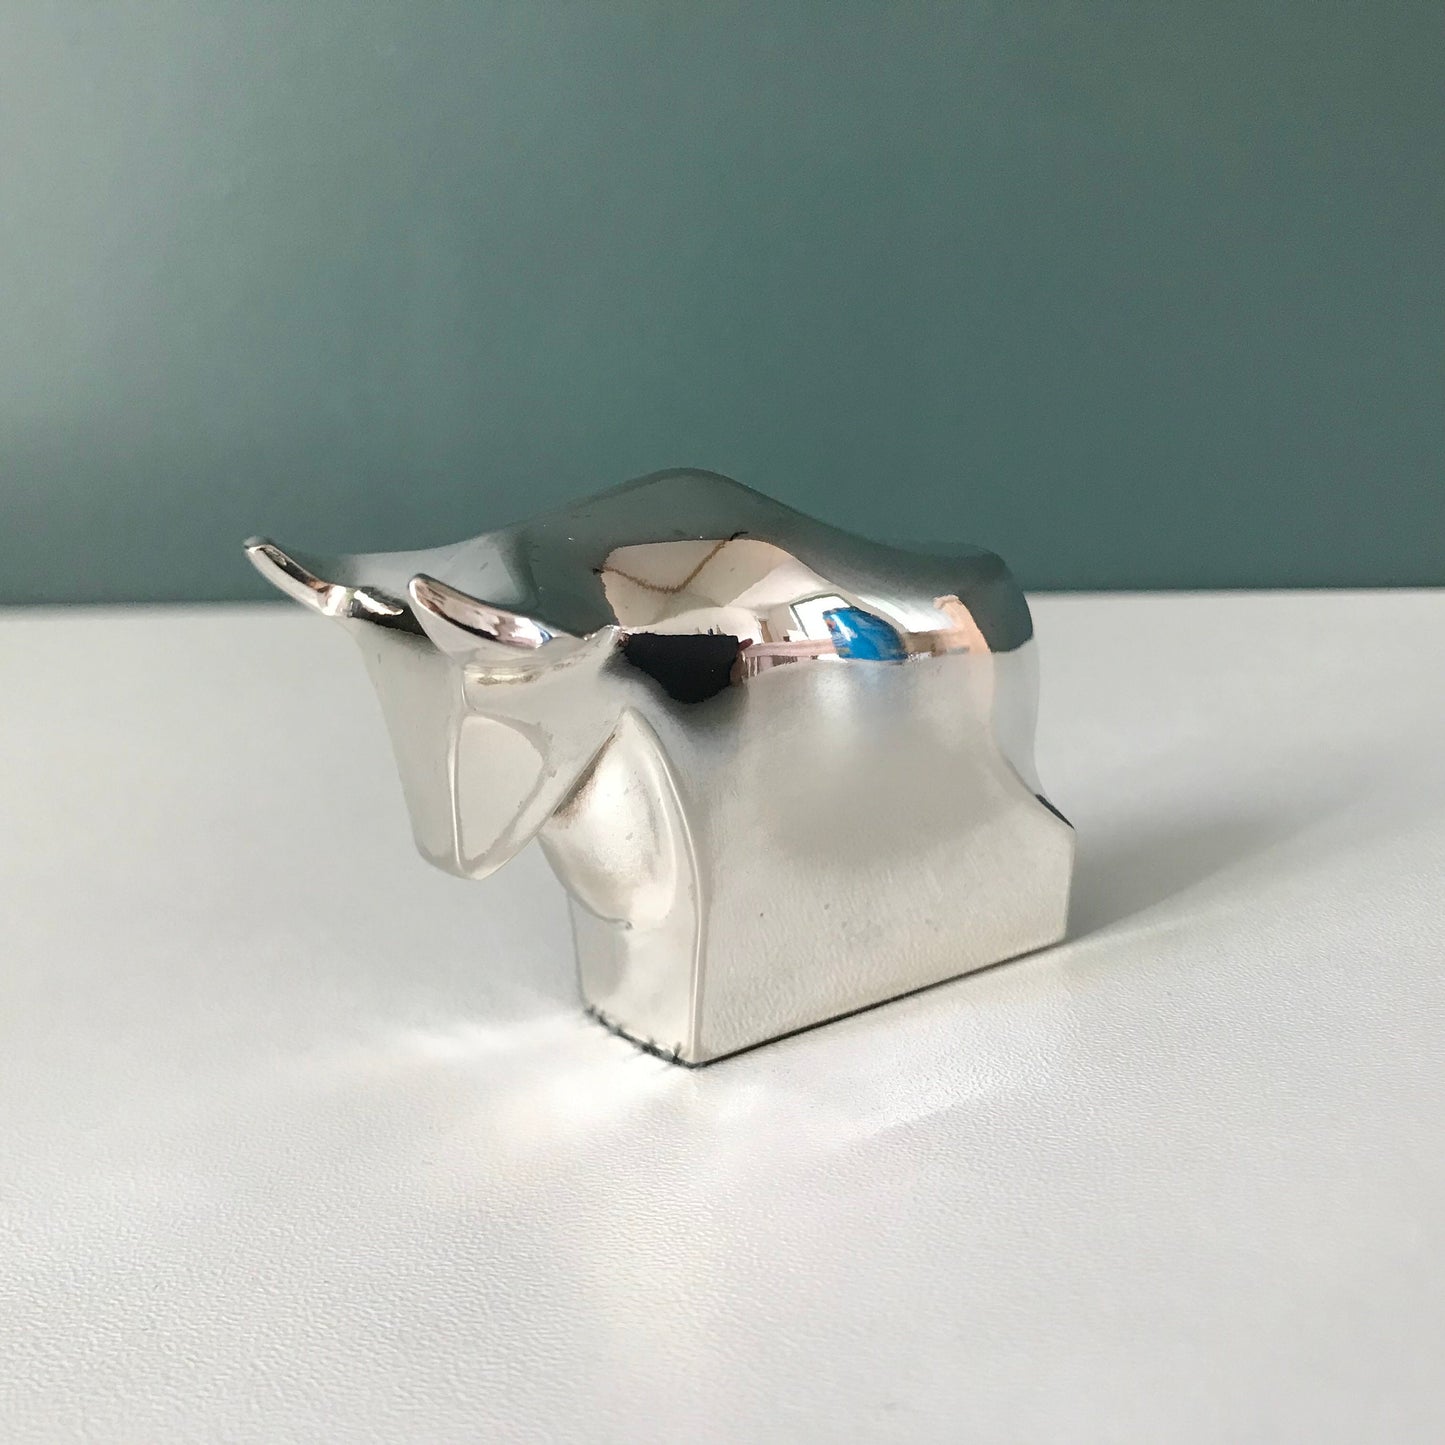 Dansk Designs Boxed Silver Plated Bull Paperweight Danish Swedish Vintage Office Work Gifts Presents